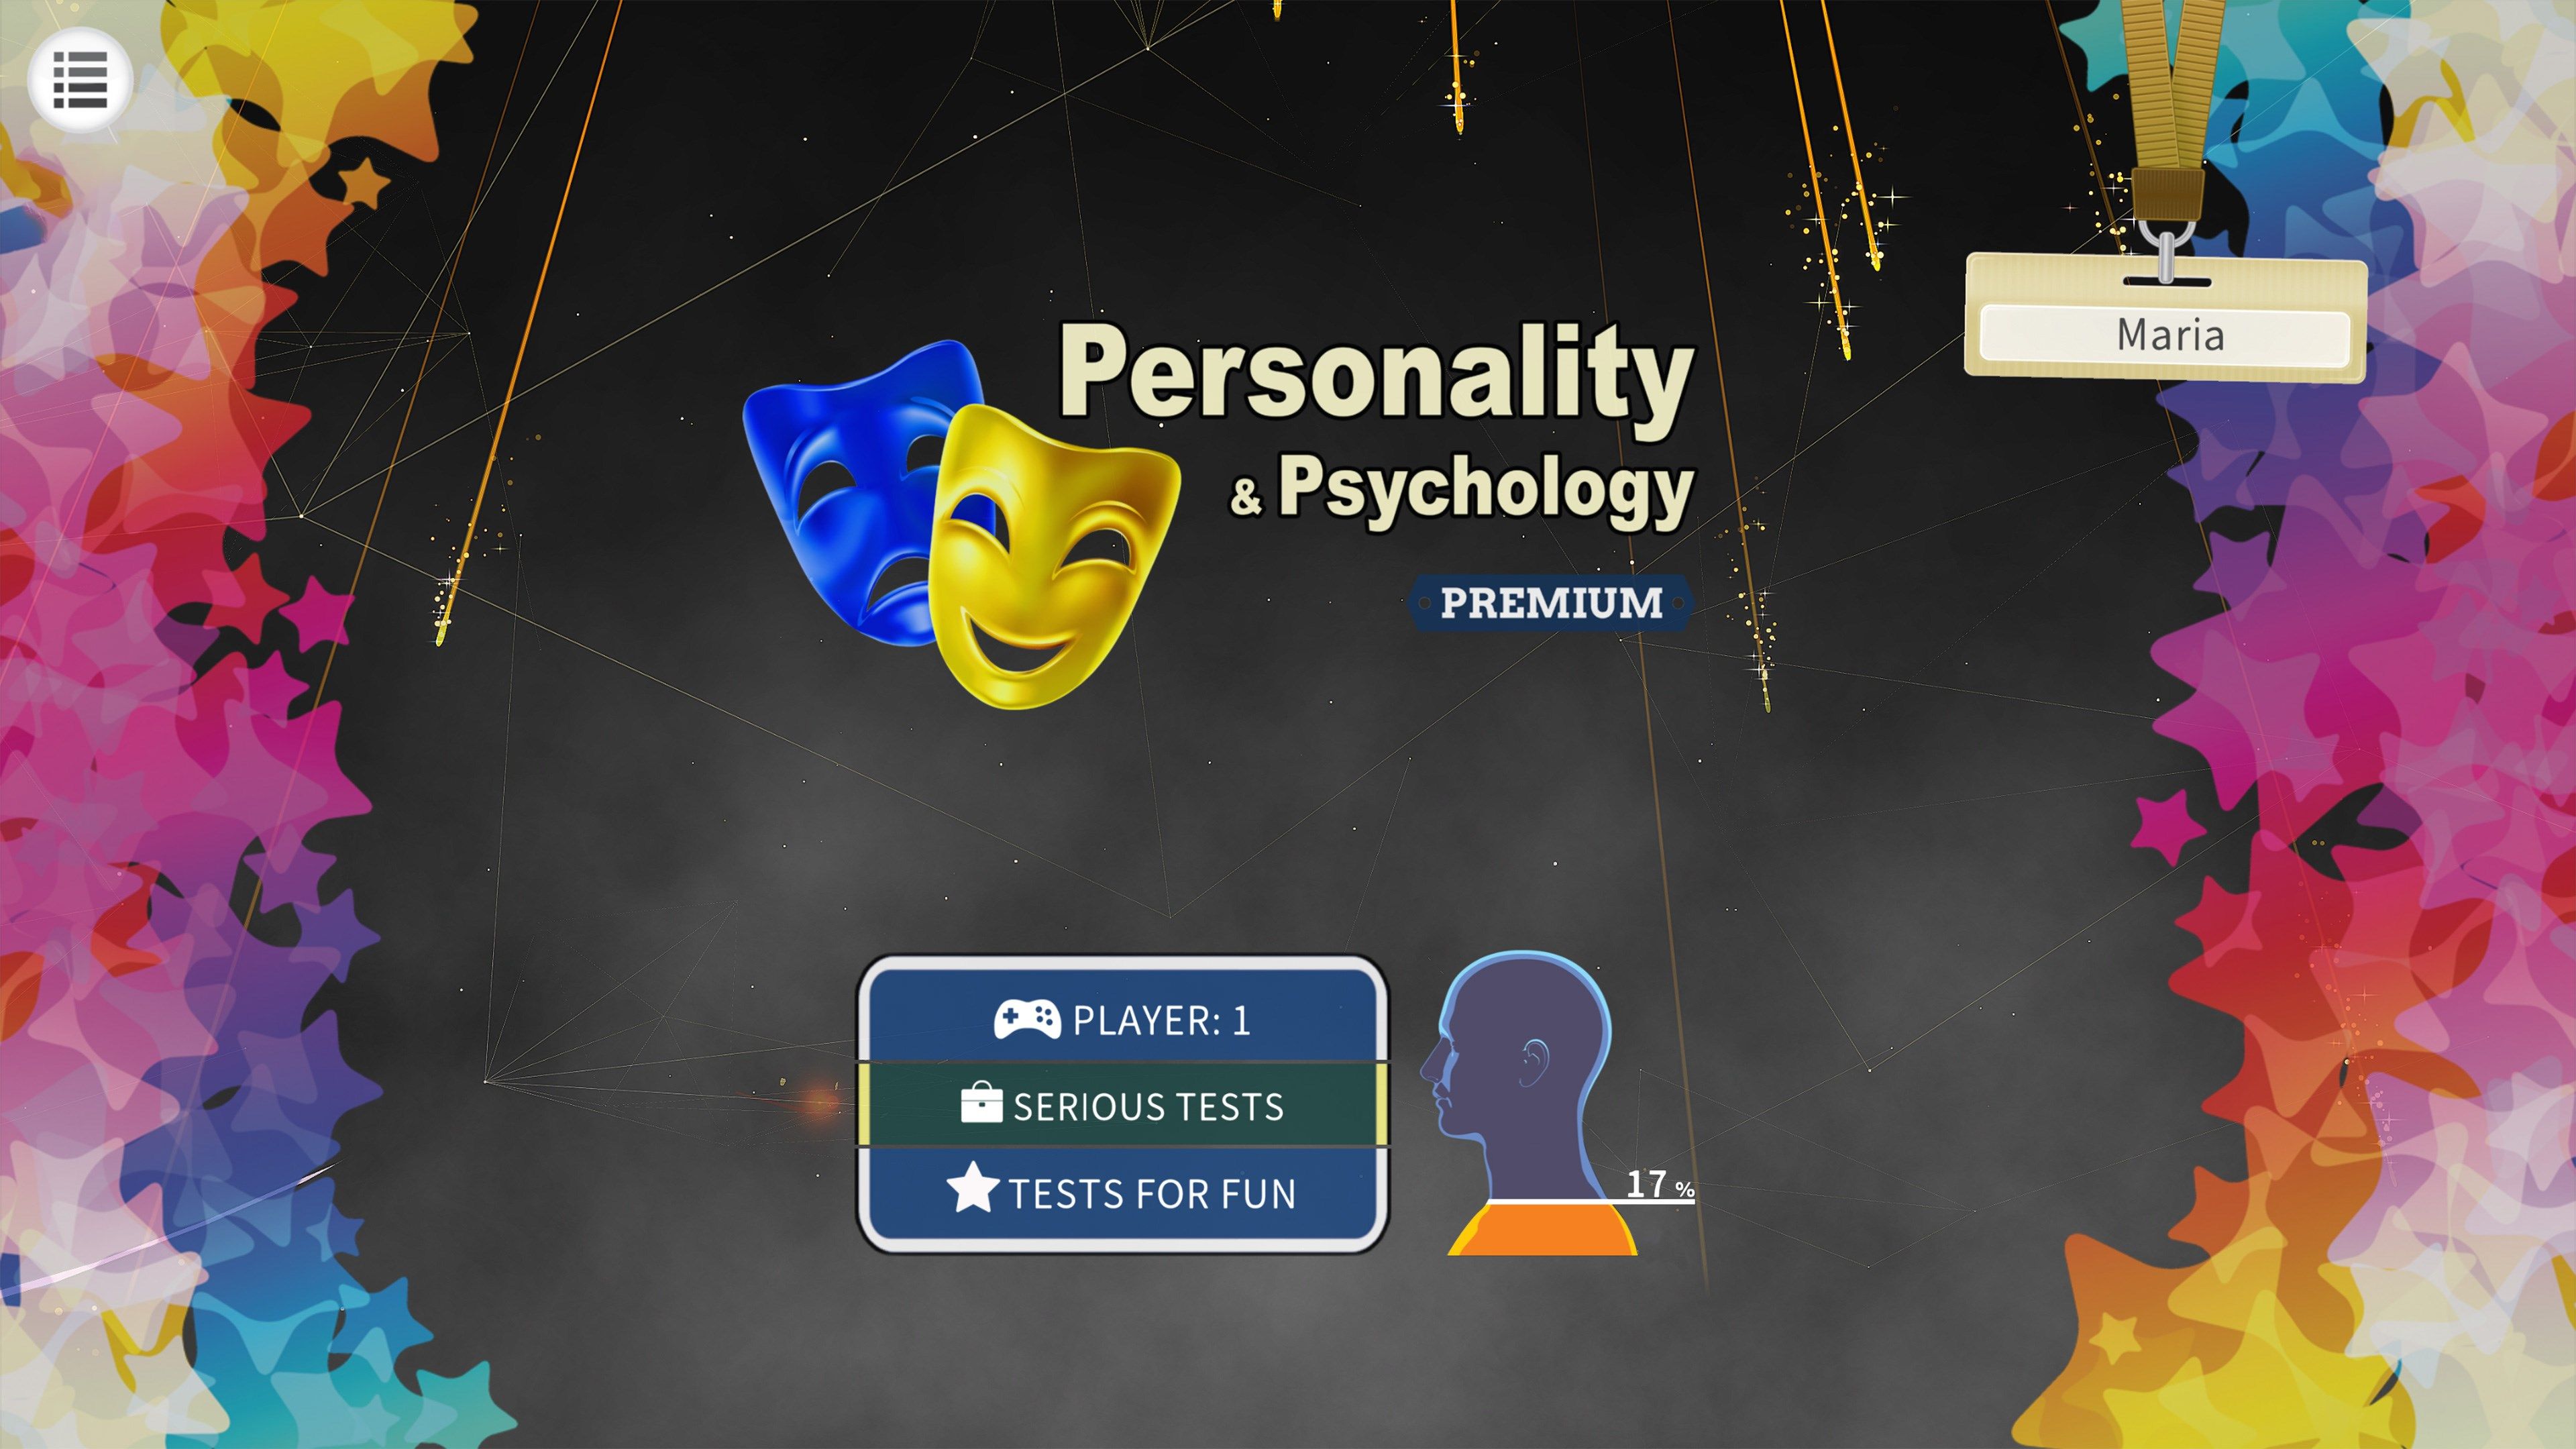 Personality and Psychology Premium